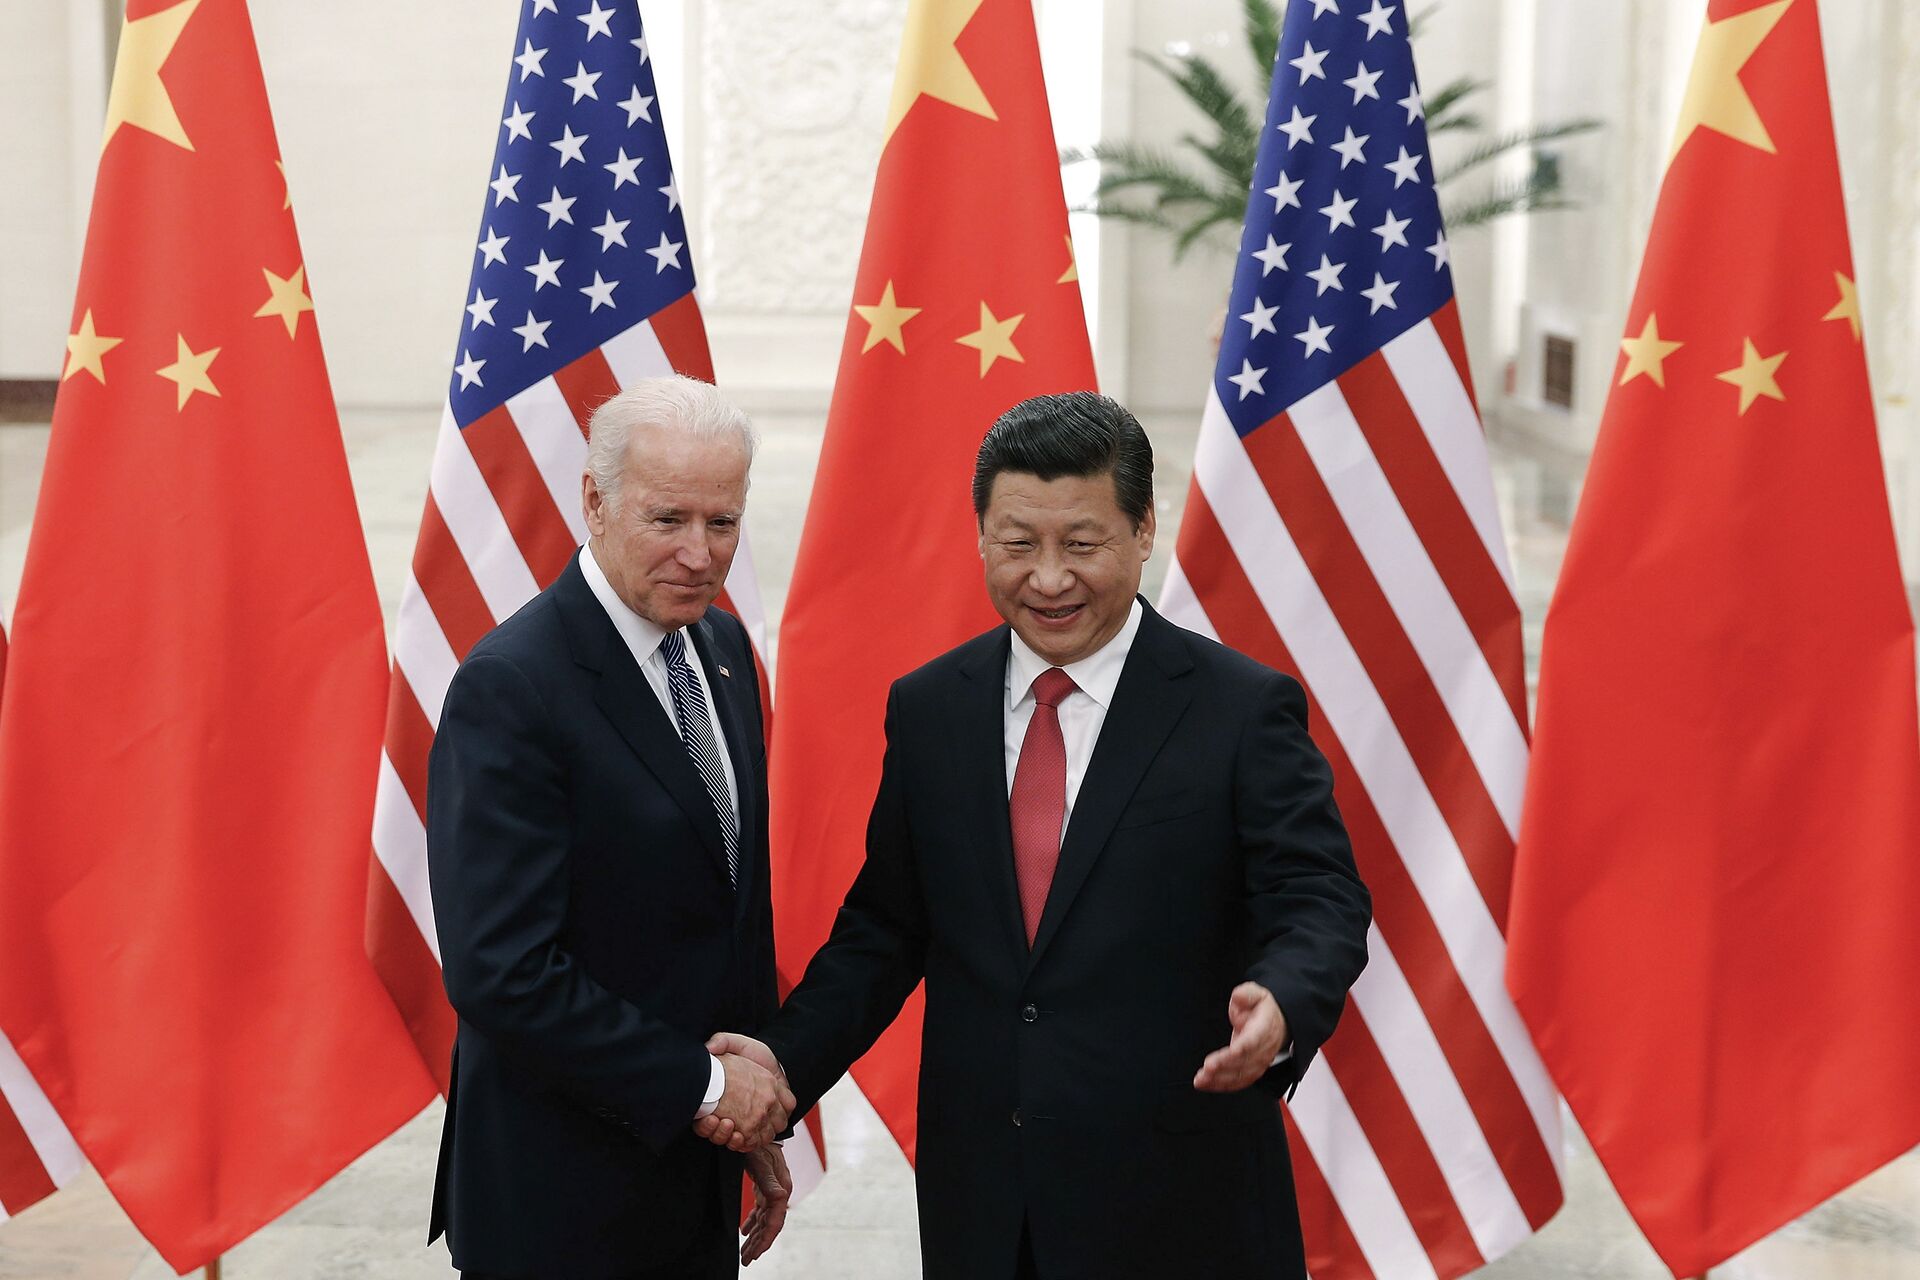 FILE - In this Dec. 4, 2013, file photo, Chinese President Xi Jinping, right, shakes hands with then U.S. Vice President Joe Biden as they pose for photos at the Great Hall of the People in Beijing. - Sputnik International, 1920, 15.11.2021